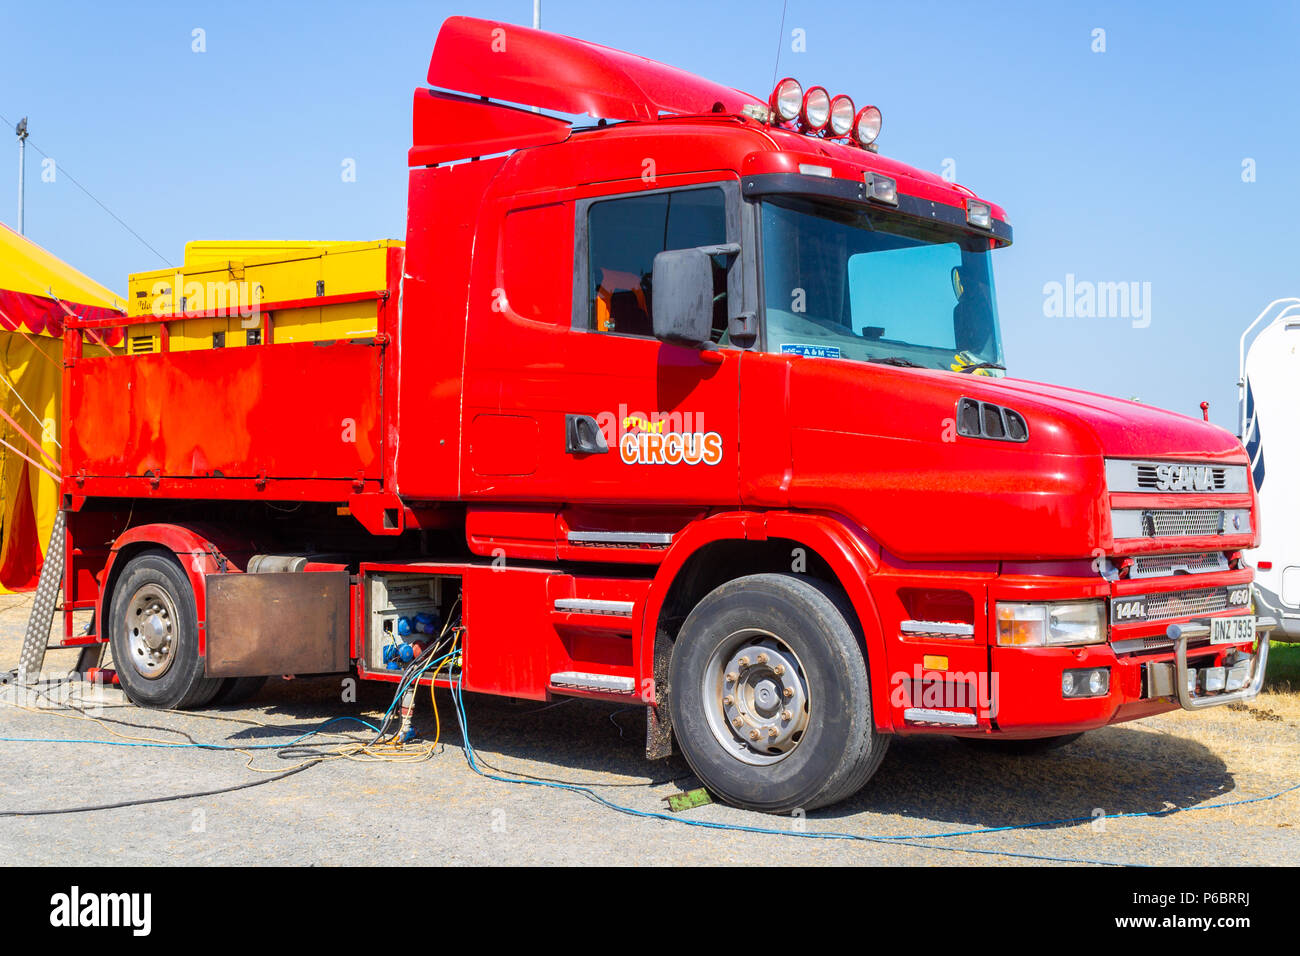 Scania lorry or truck painted bright red in circus colours supplying power to the circus. circus lorry or circus truck Stock Photo